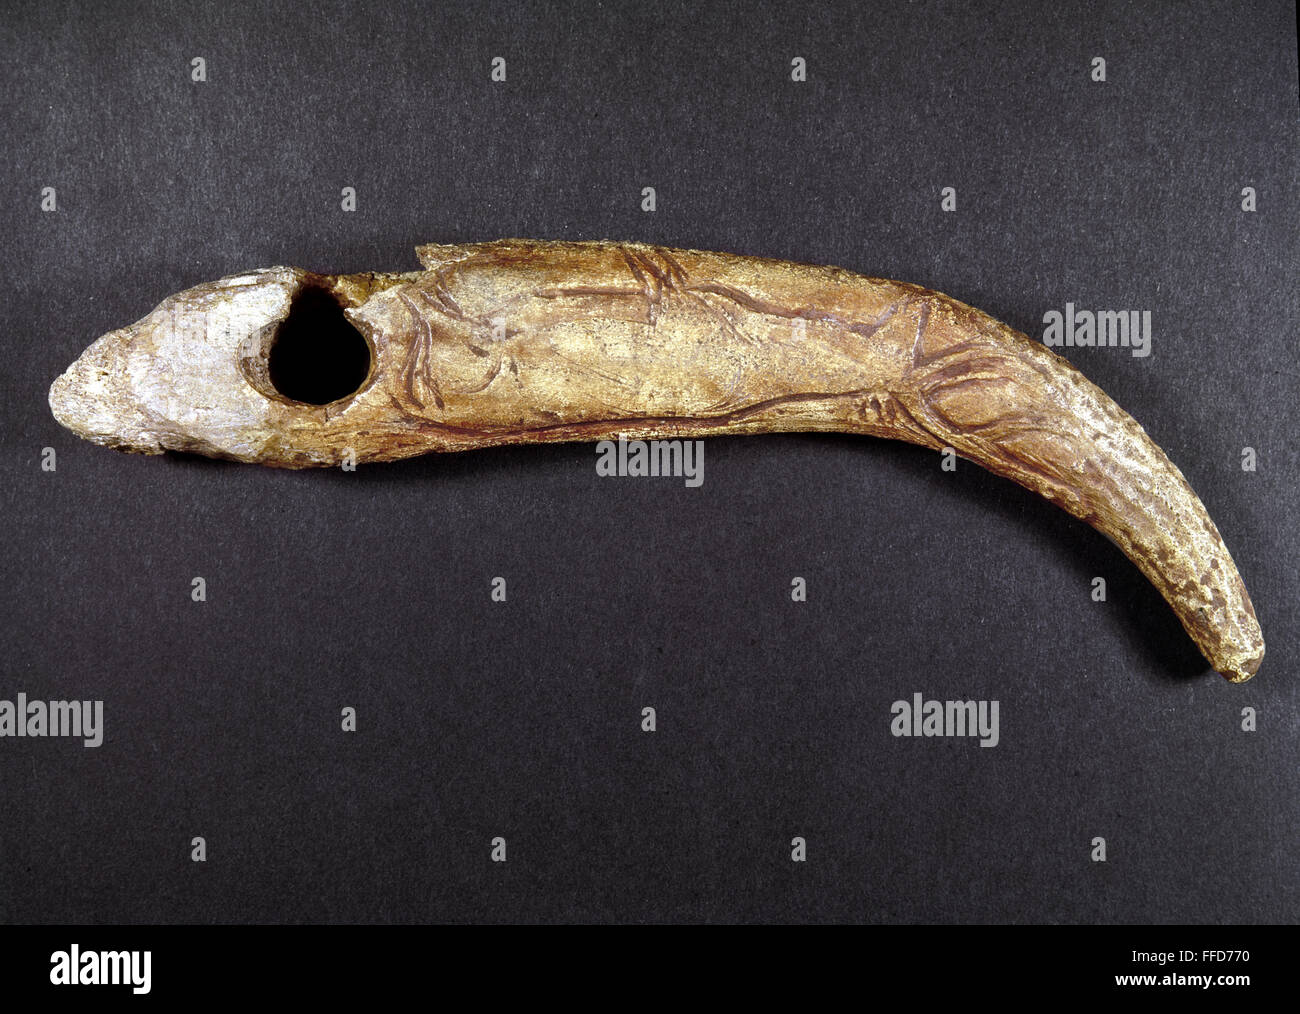 NATIVE AMERICAN TOOL. /nNorth American Indian antler tool with a deer carving. Stock Photo